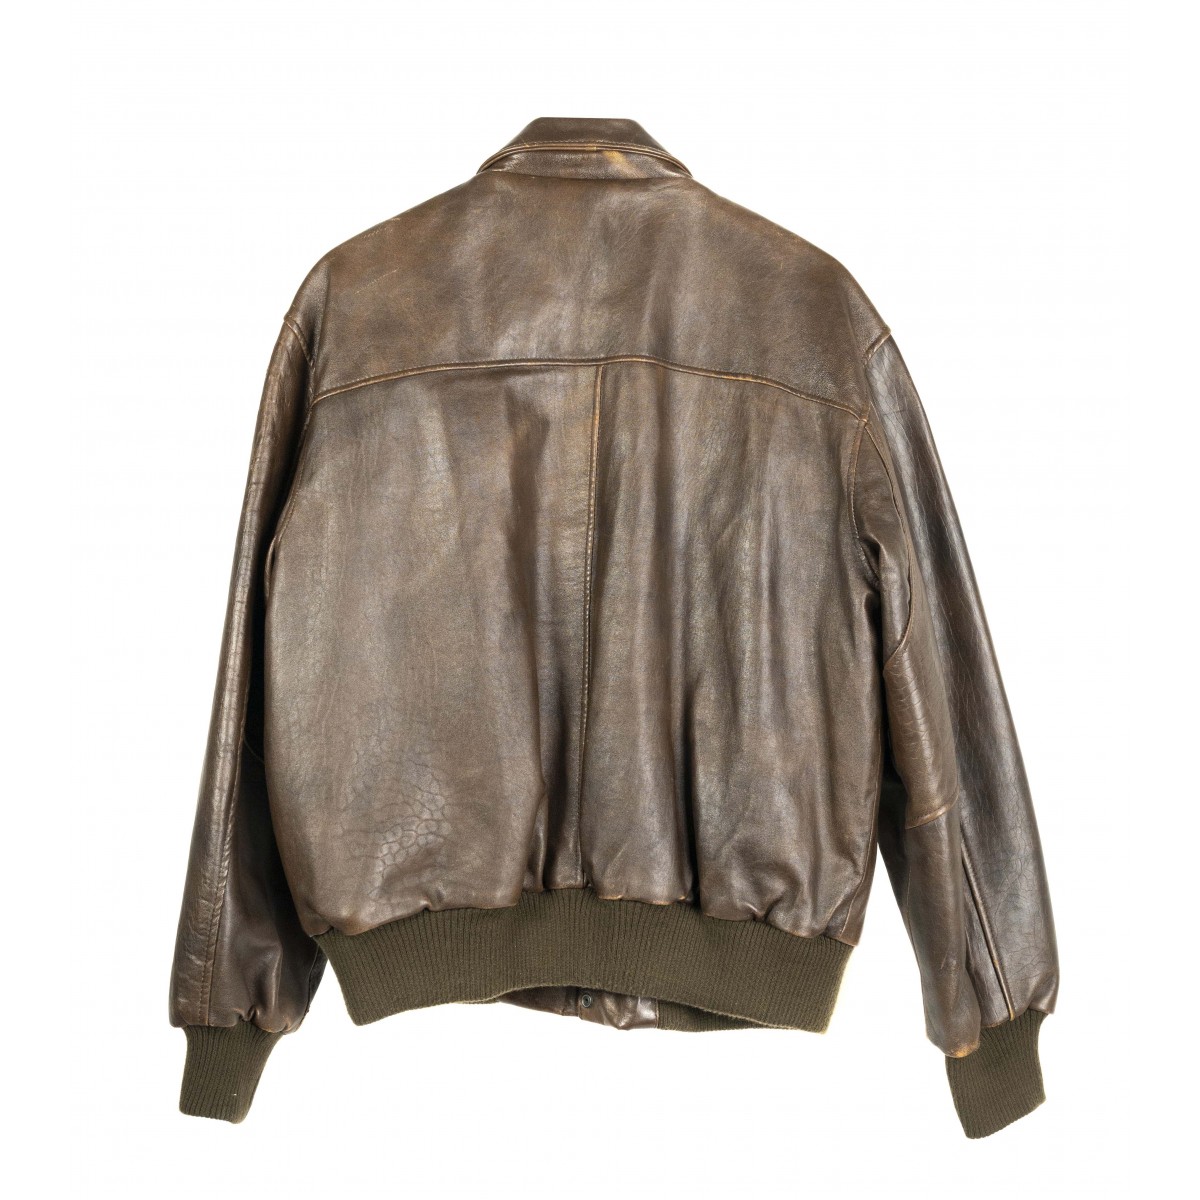 Reproduction WWII A2 jacket (MM1432)